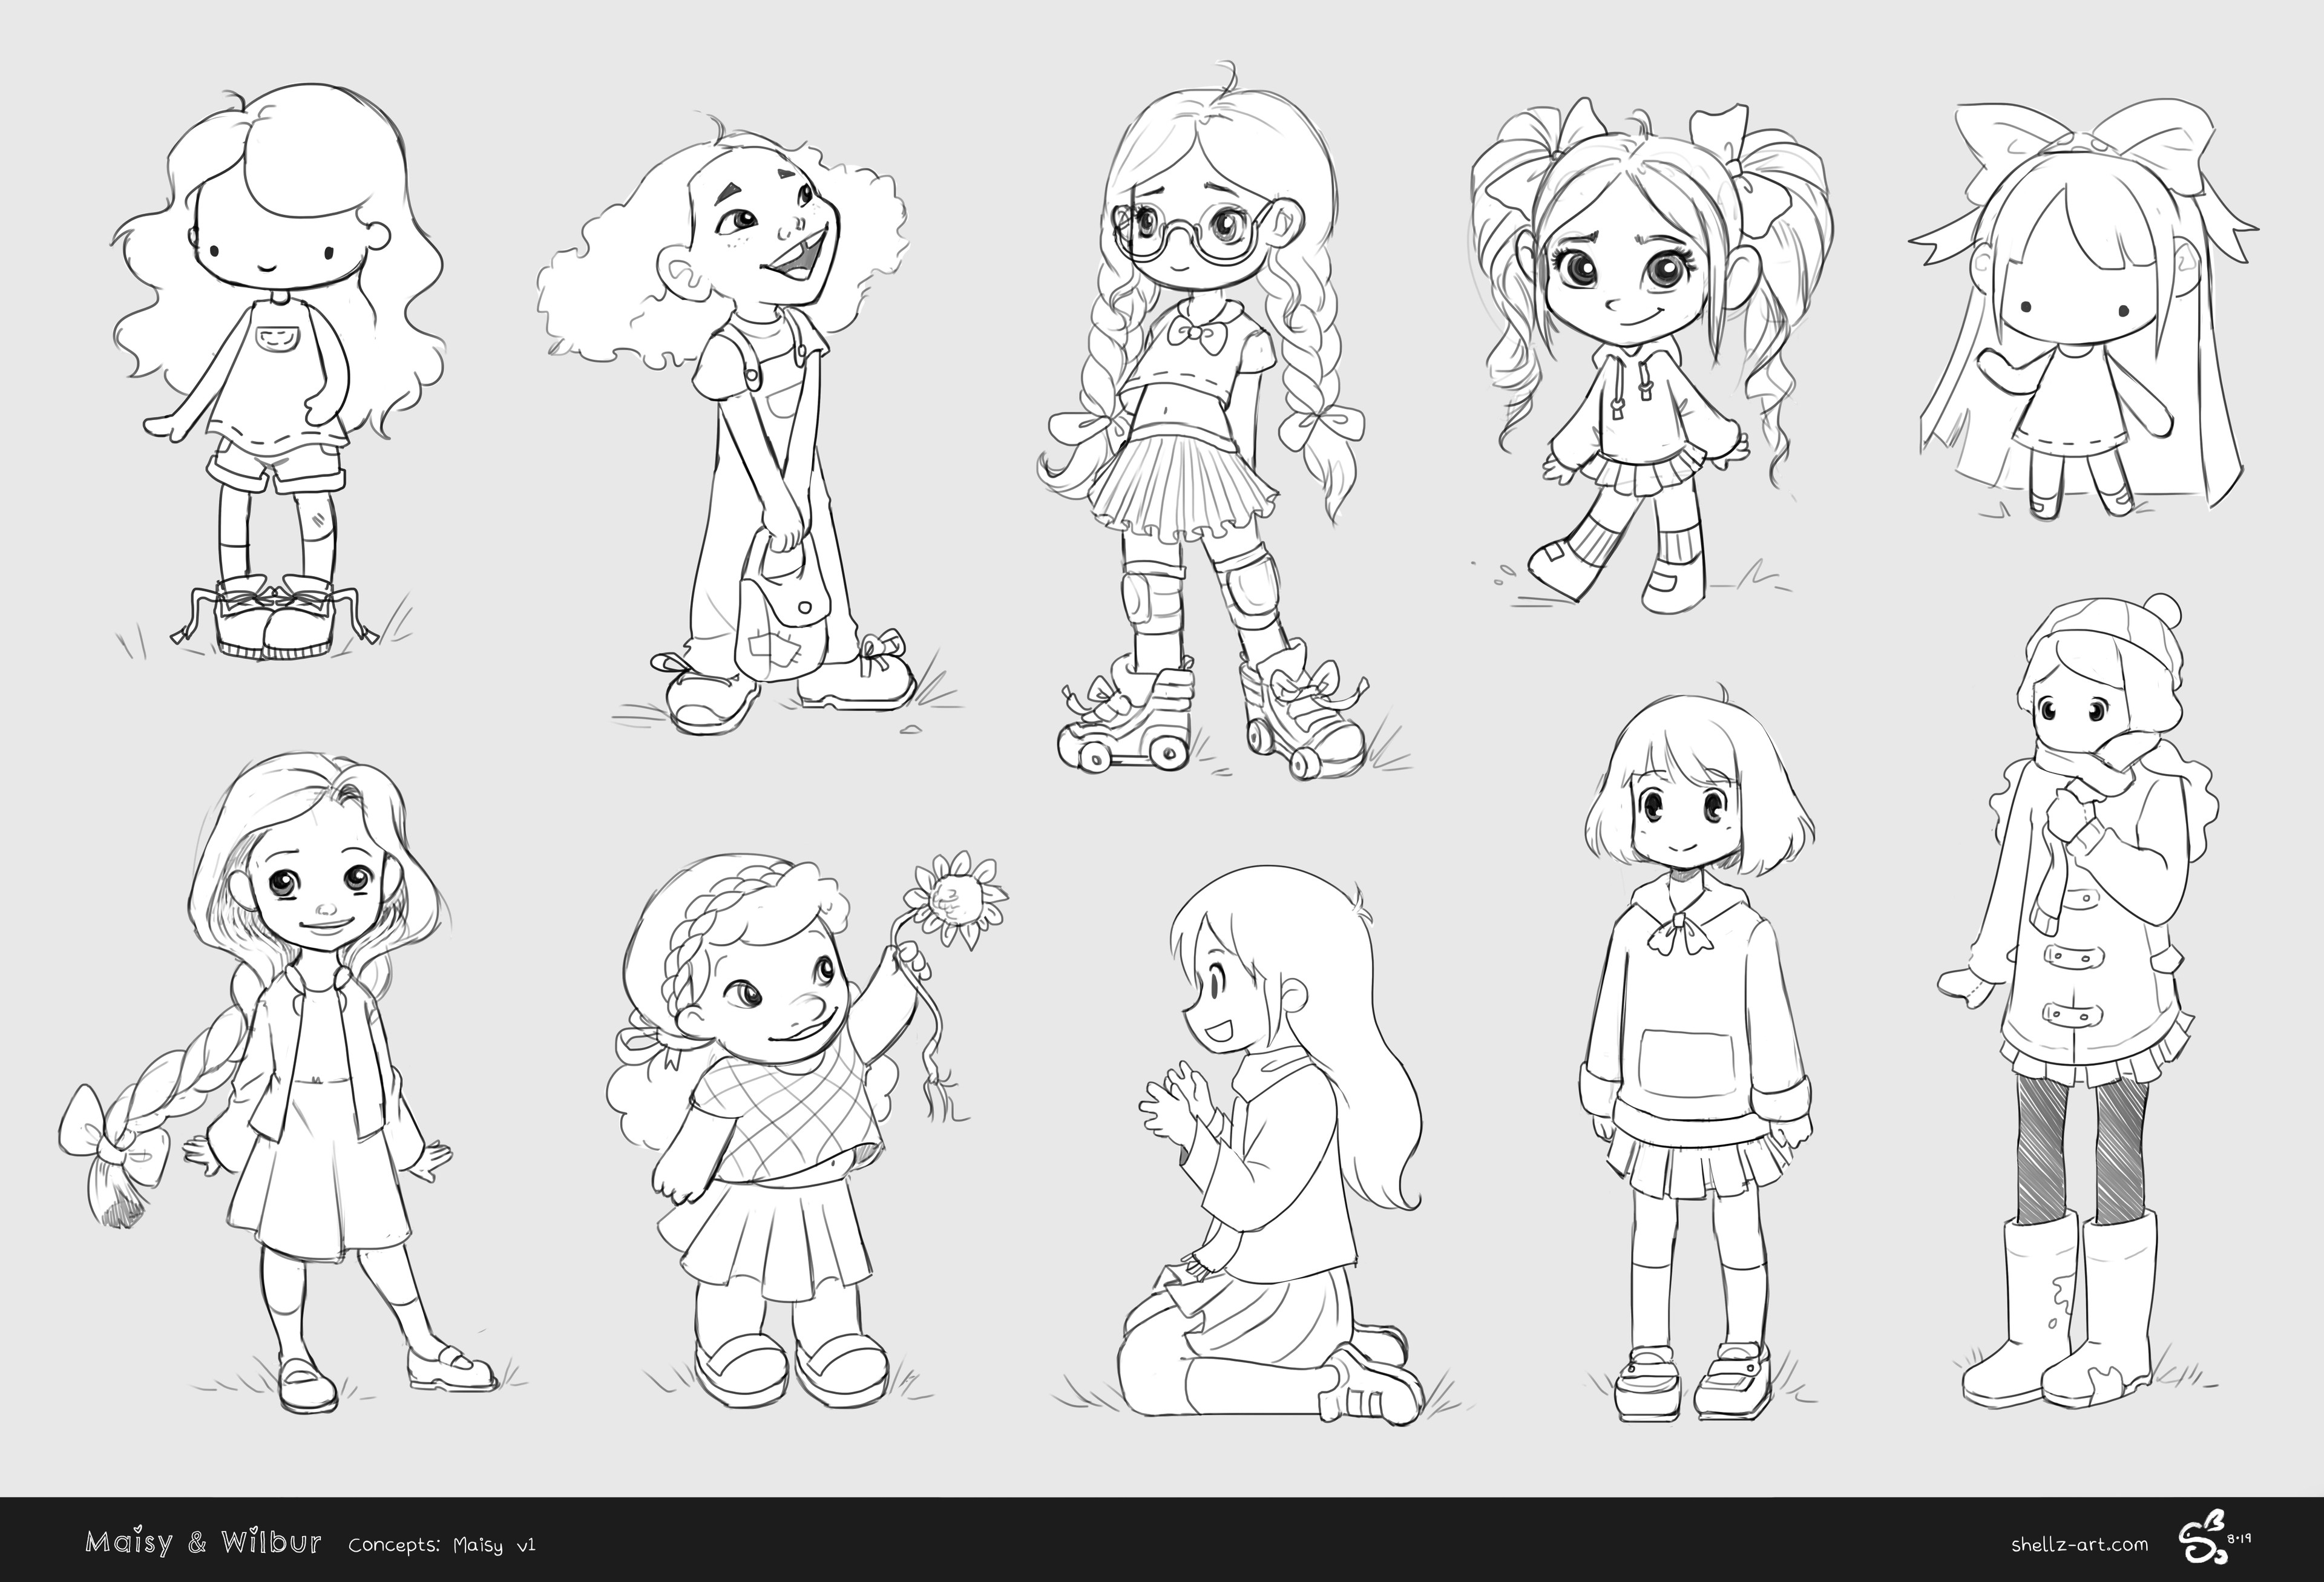 Initial concepts for Maisy